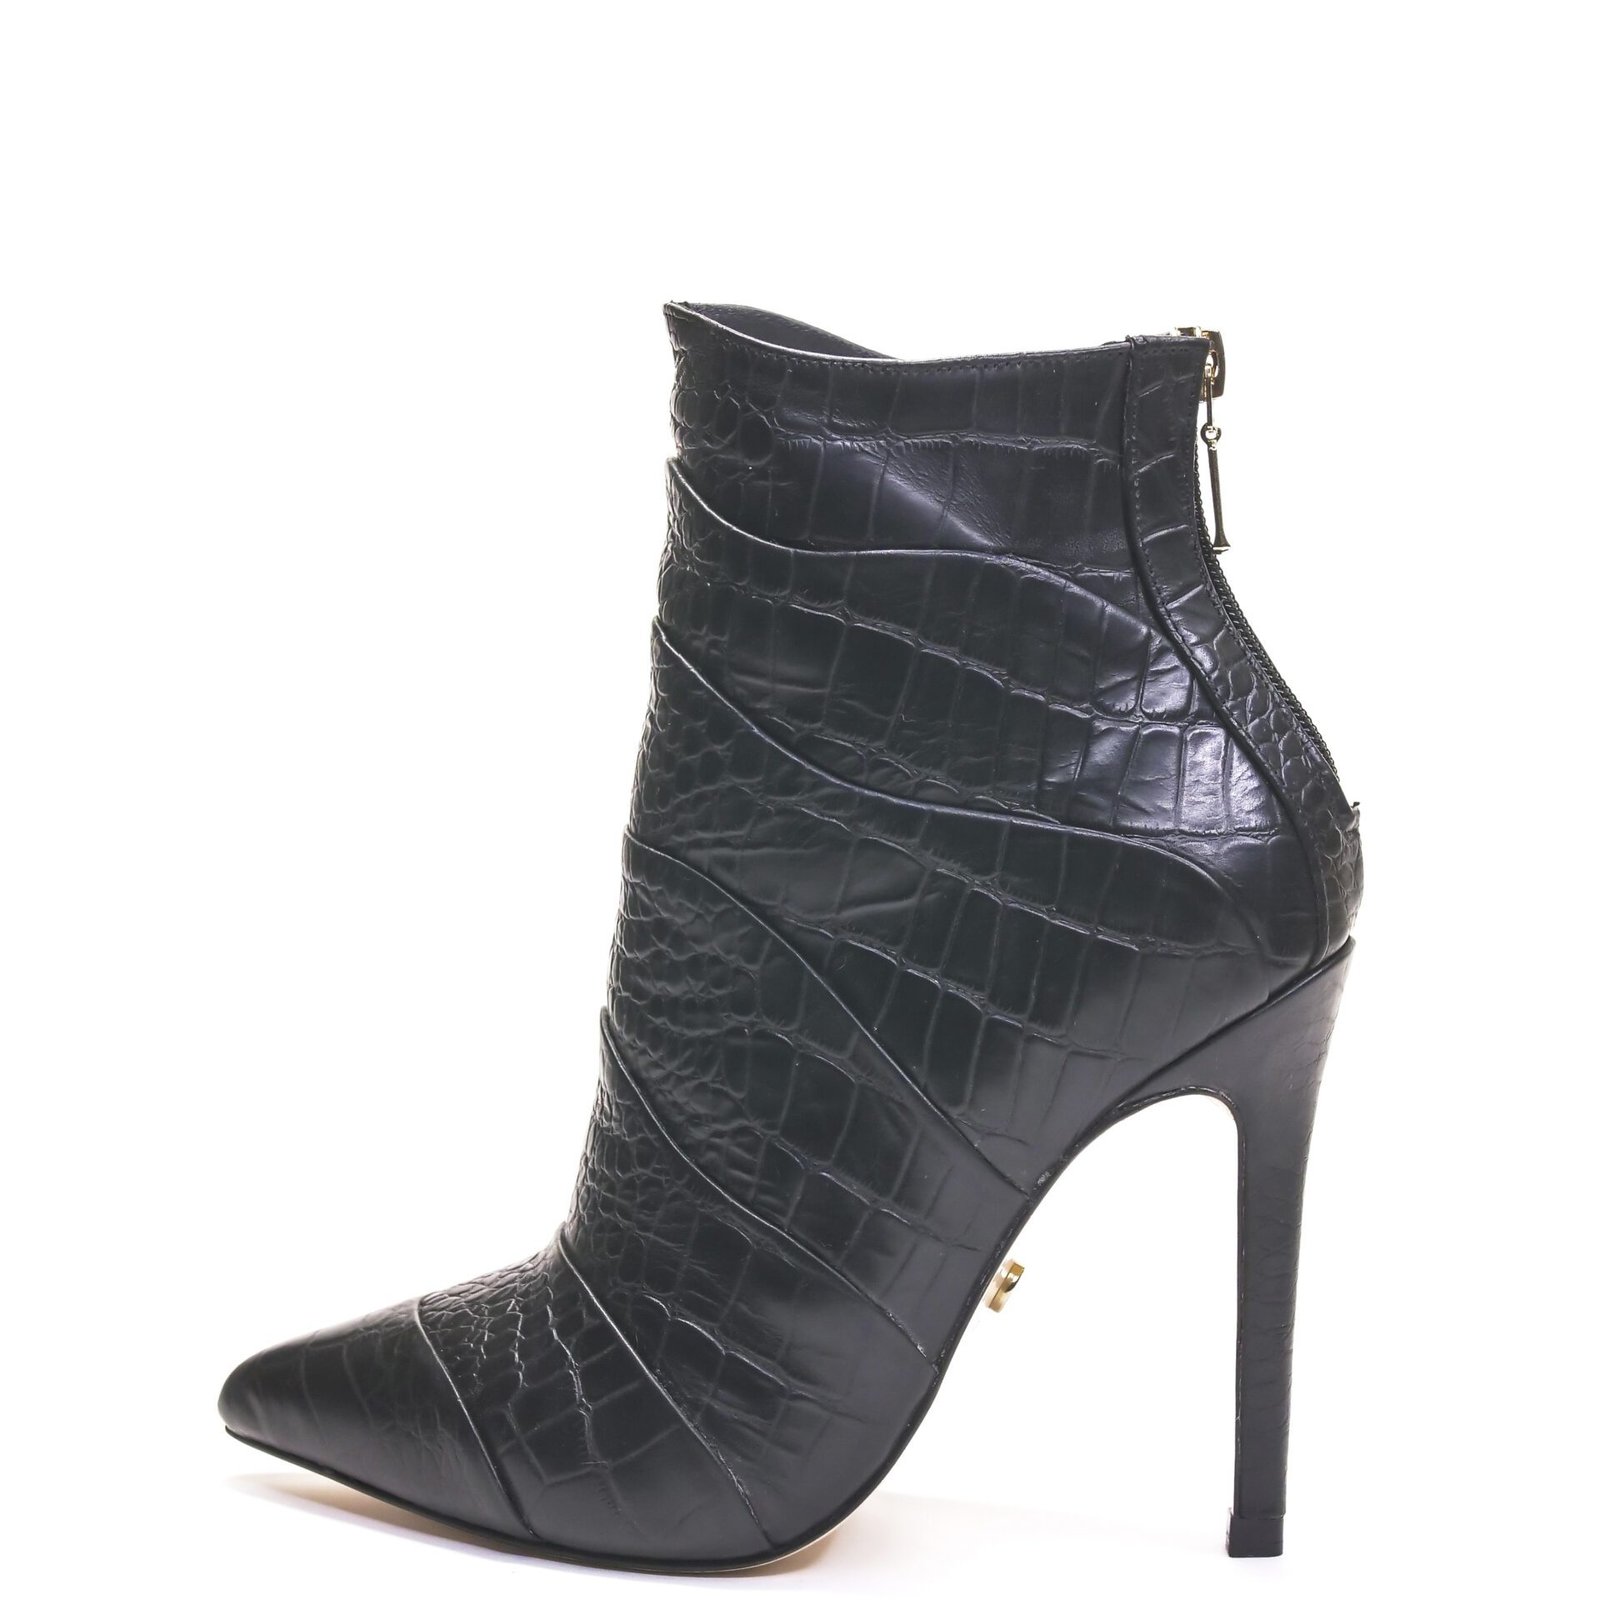 black leather 4 inch heel boots